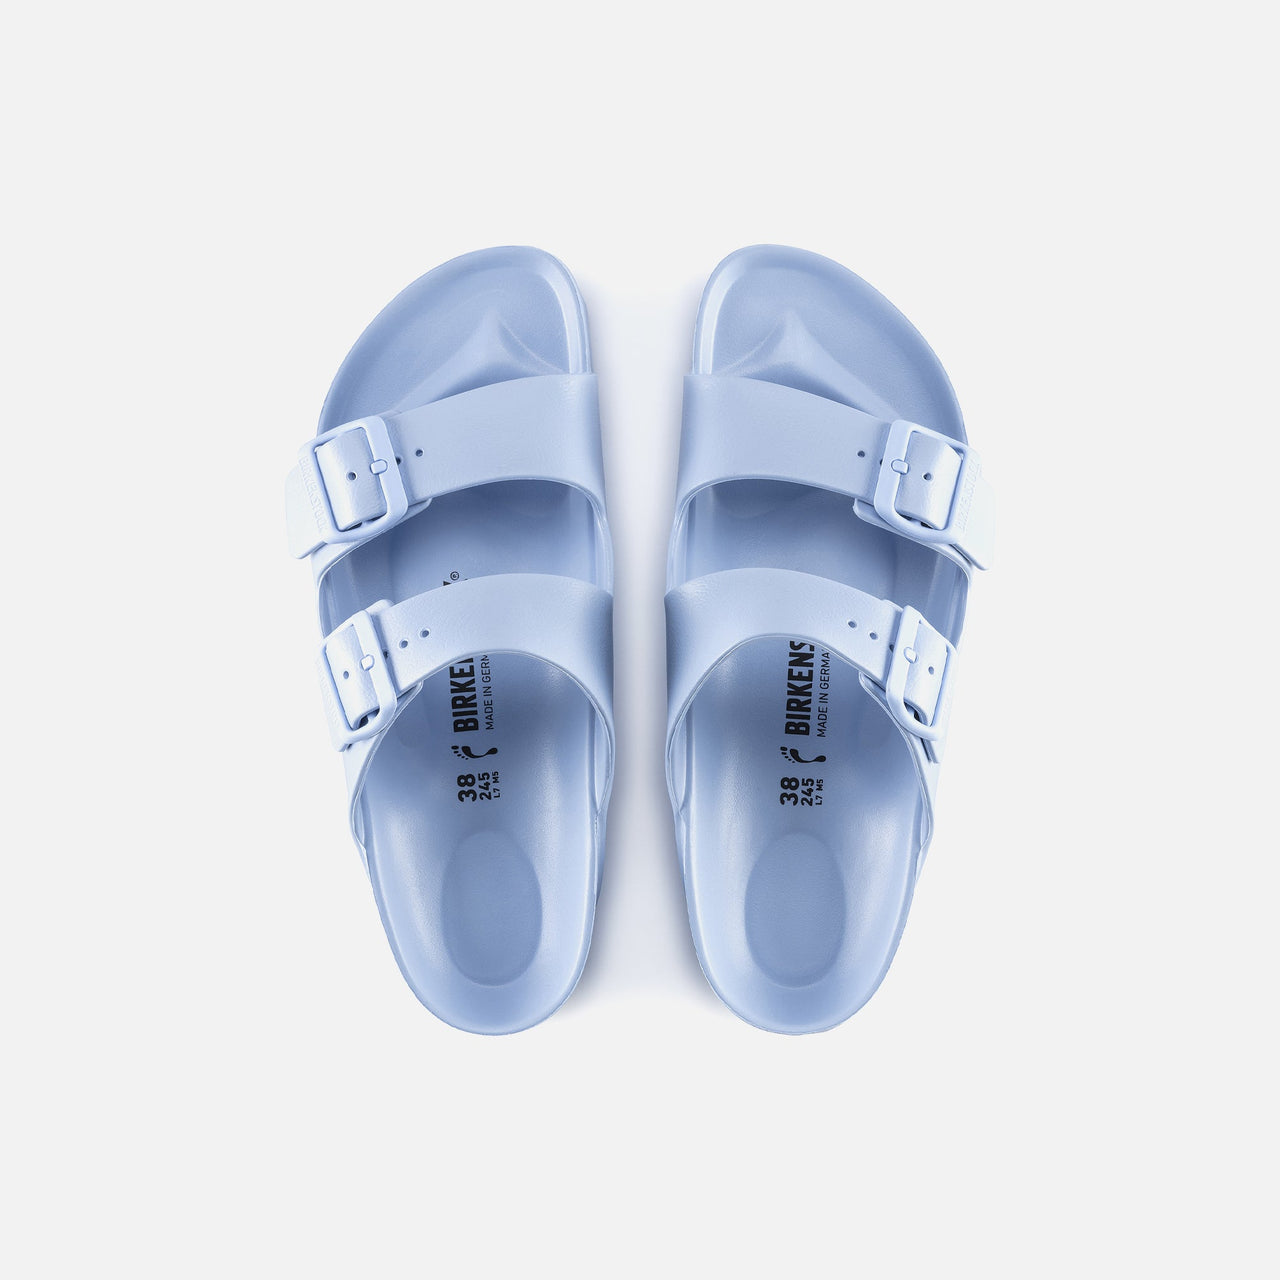  Detailed view of the Birkenstock Arizona Eva Dusty Blue sandals, showcasing the adjustable straps and comfortable footbed